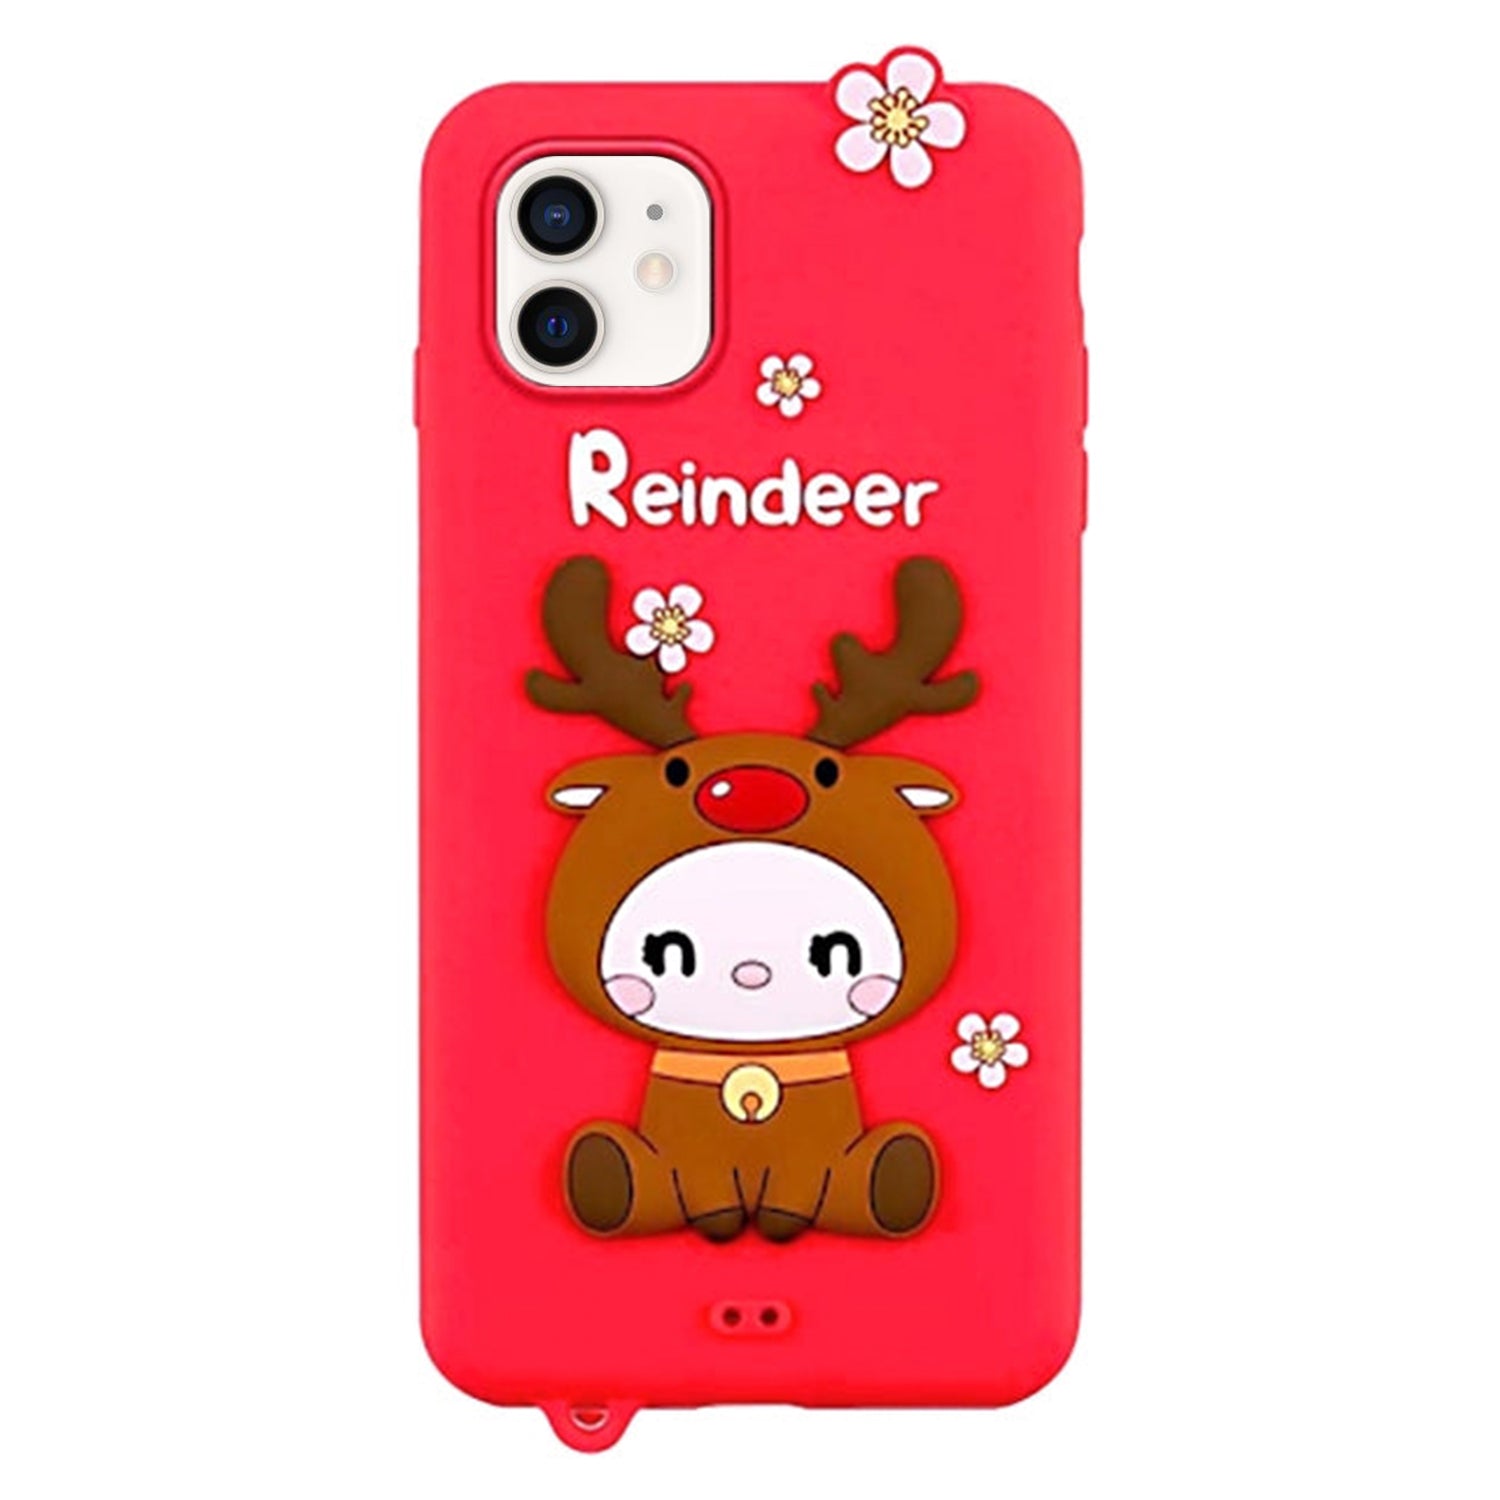 3D Silicone Cute Reindeer With Pendant Cartoon Case for iPhone 12 Mini (5.4") - Pink